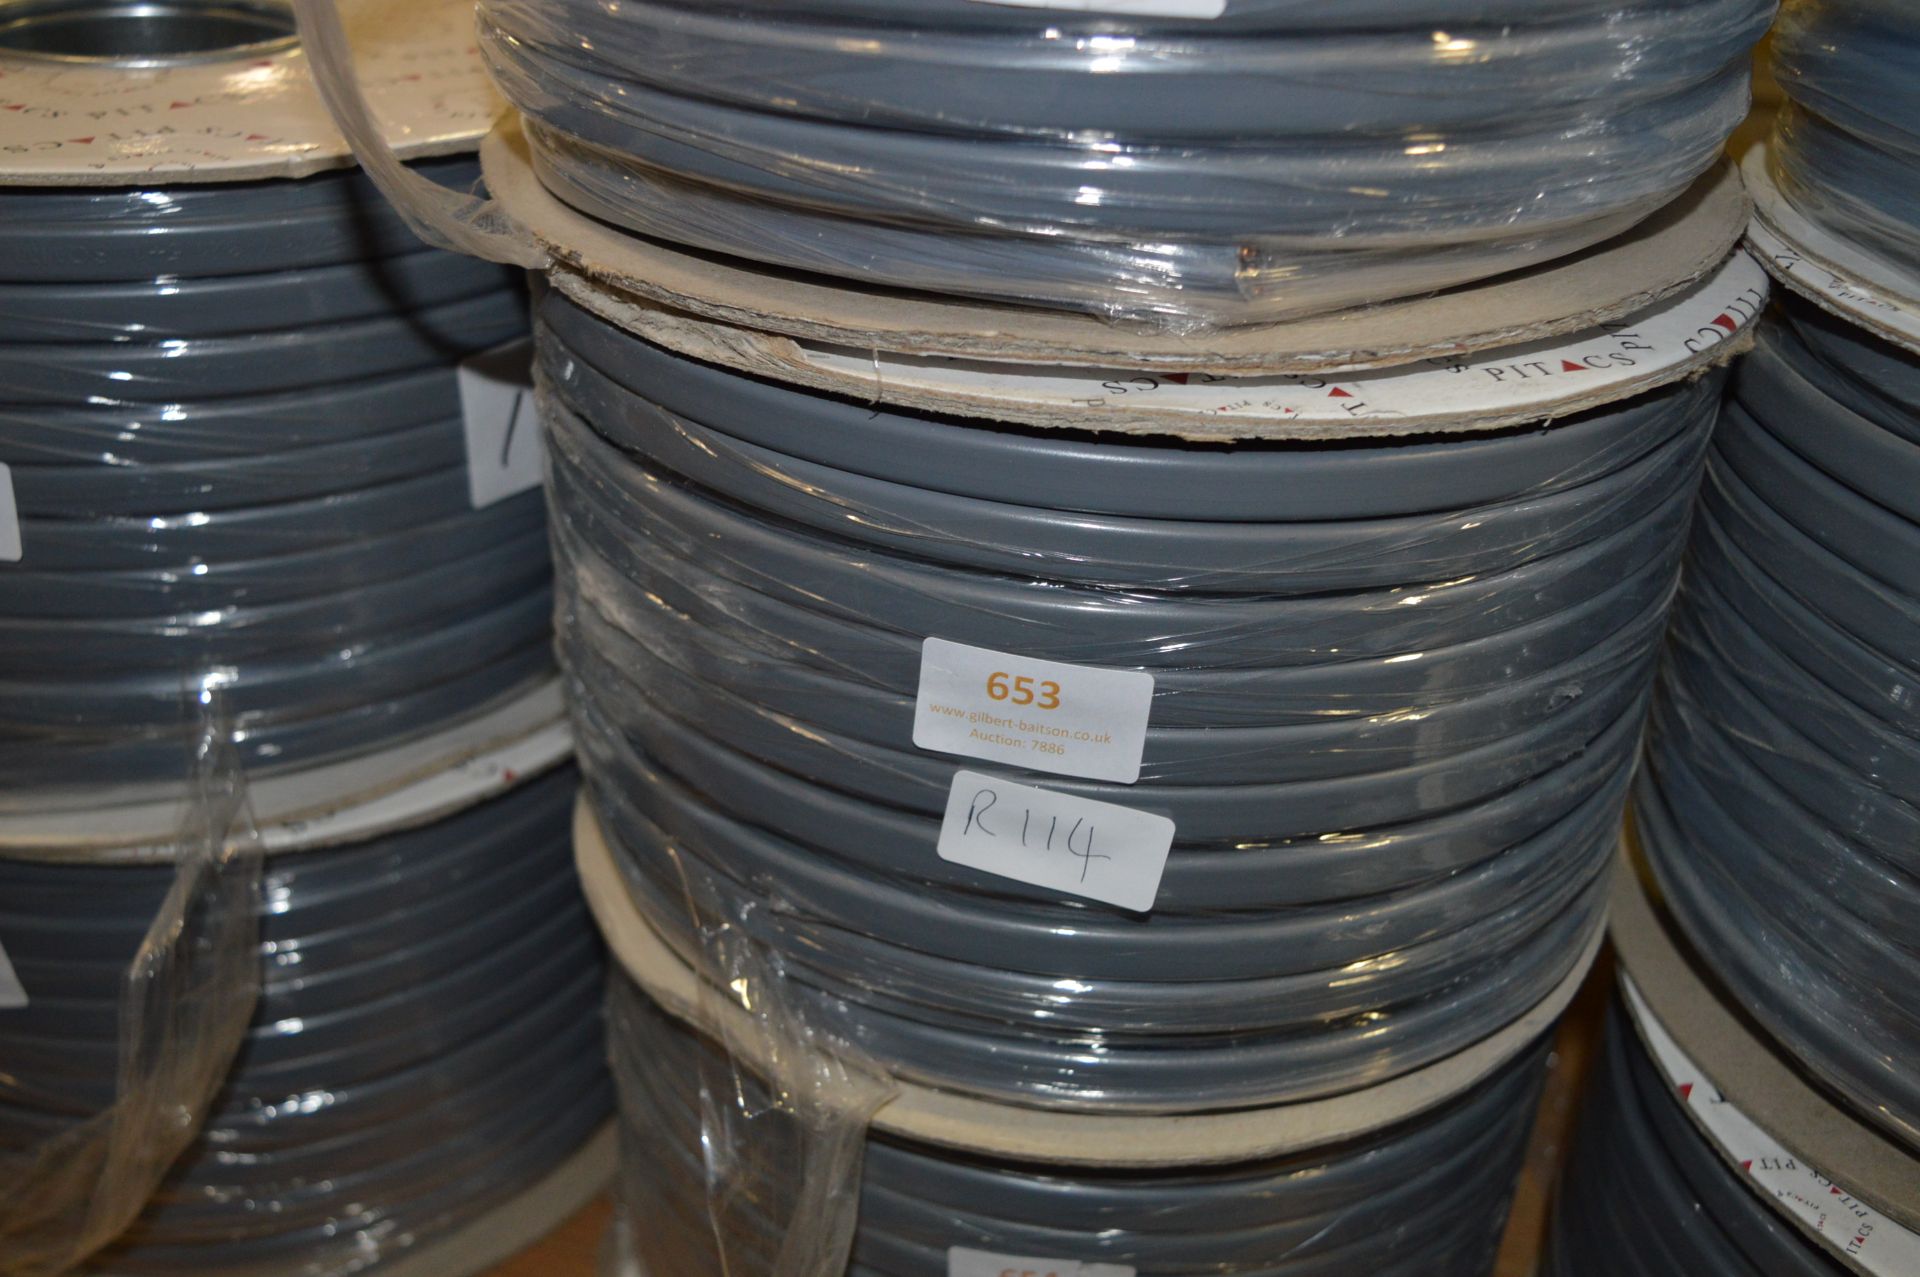 *Spool of 100m of Three Core Cable (Grey) - 1.5mm